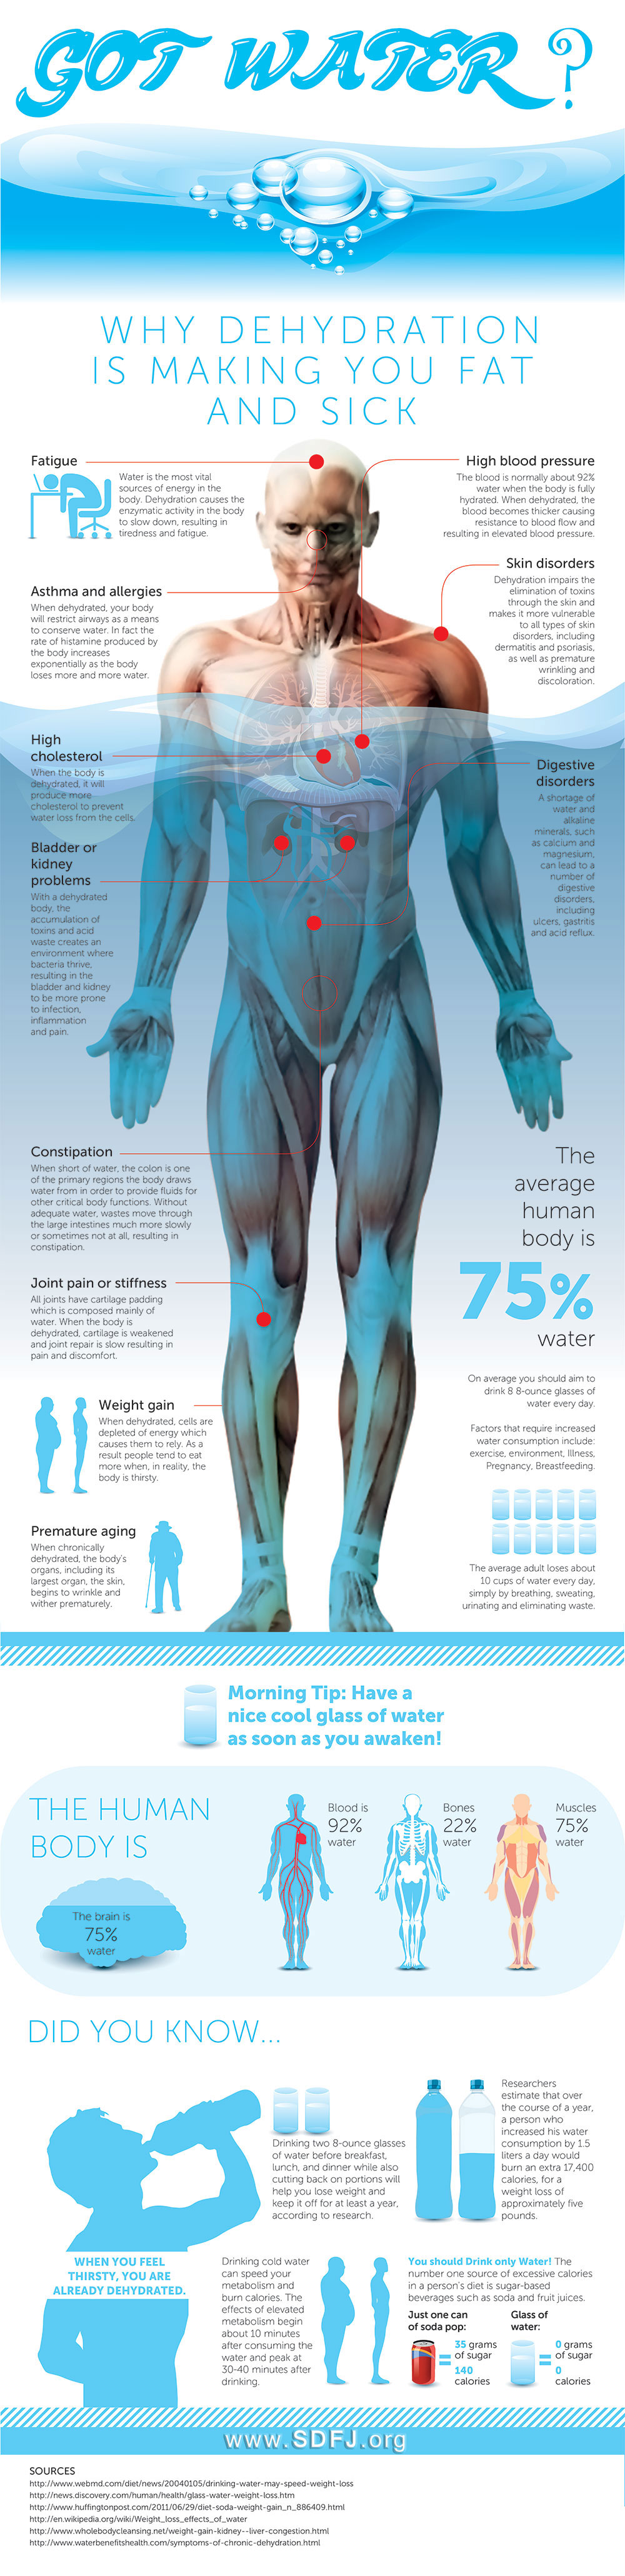 benefits of water, does dehydration make you sick, drinking enough water, energy drink, weight loss products